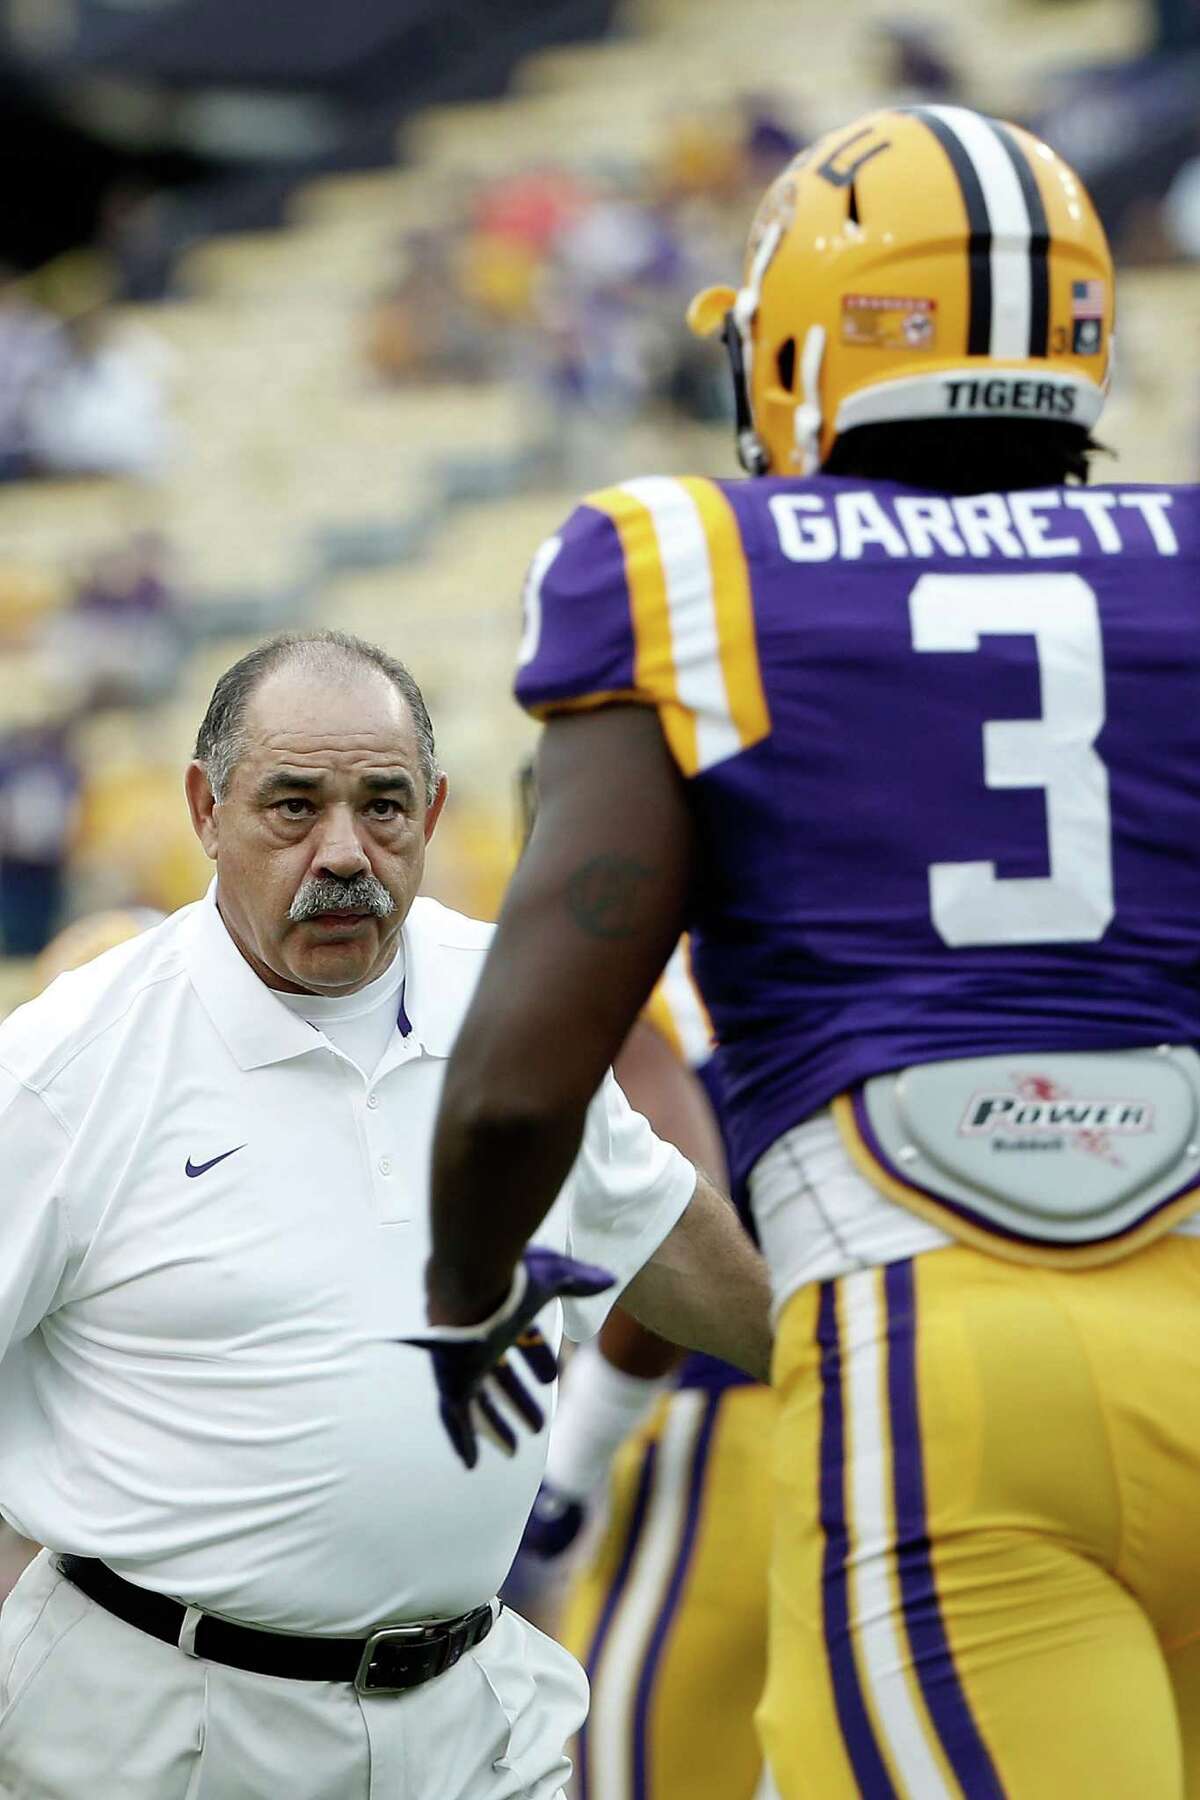 Defensive coordinator John Chavis of the LSU Tigers works with Clifton Garrett prior to a game against the Louisiana Monroe Warhawks at Tiger Stadium on September 13, 2014 in Baton Rouge, Louisiana. LSU won the game 31-0.